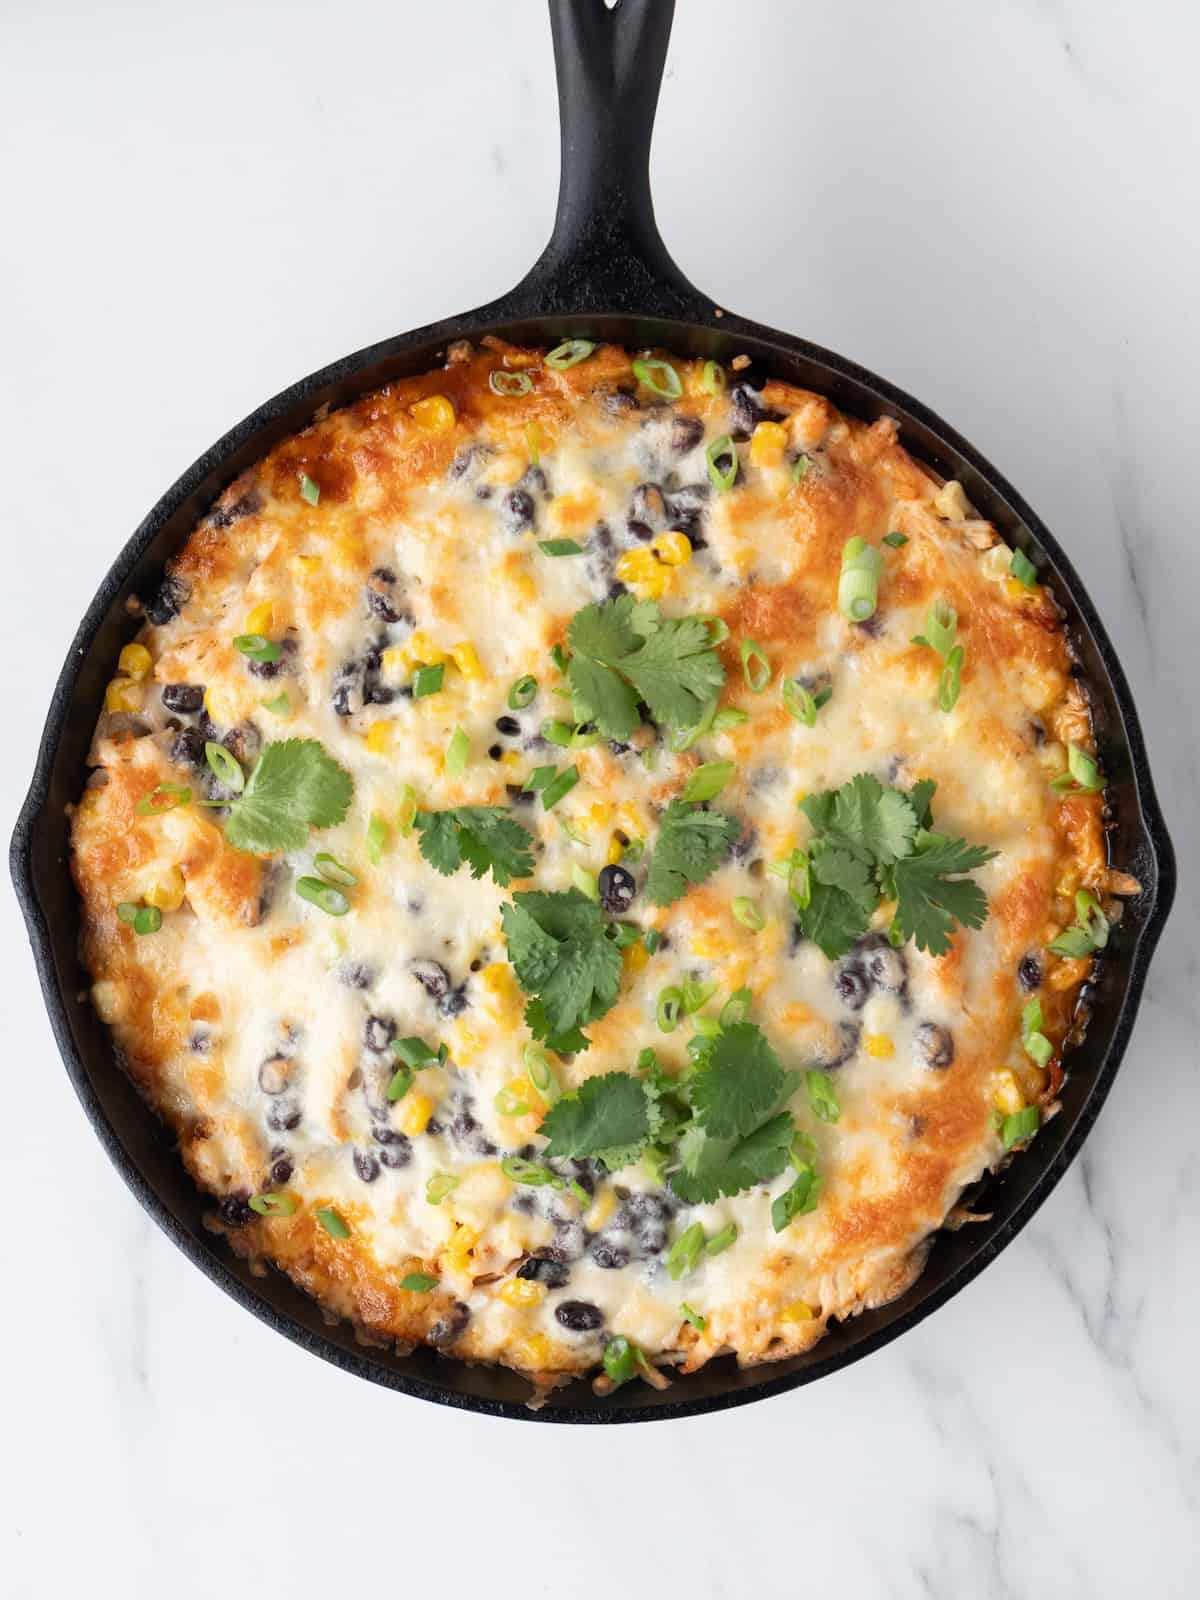 A skillet with chipotle chicken enchilada bake freshly baked and out of the oven, garnished with cilantro and green onions.